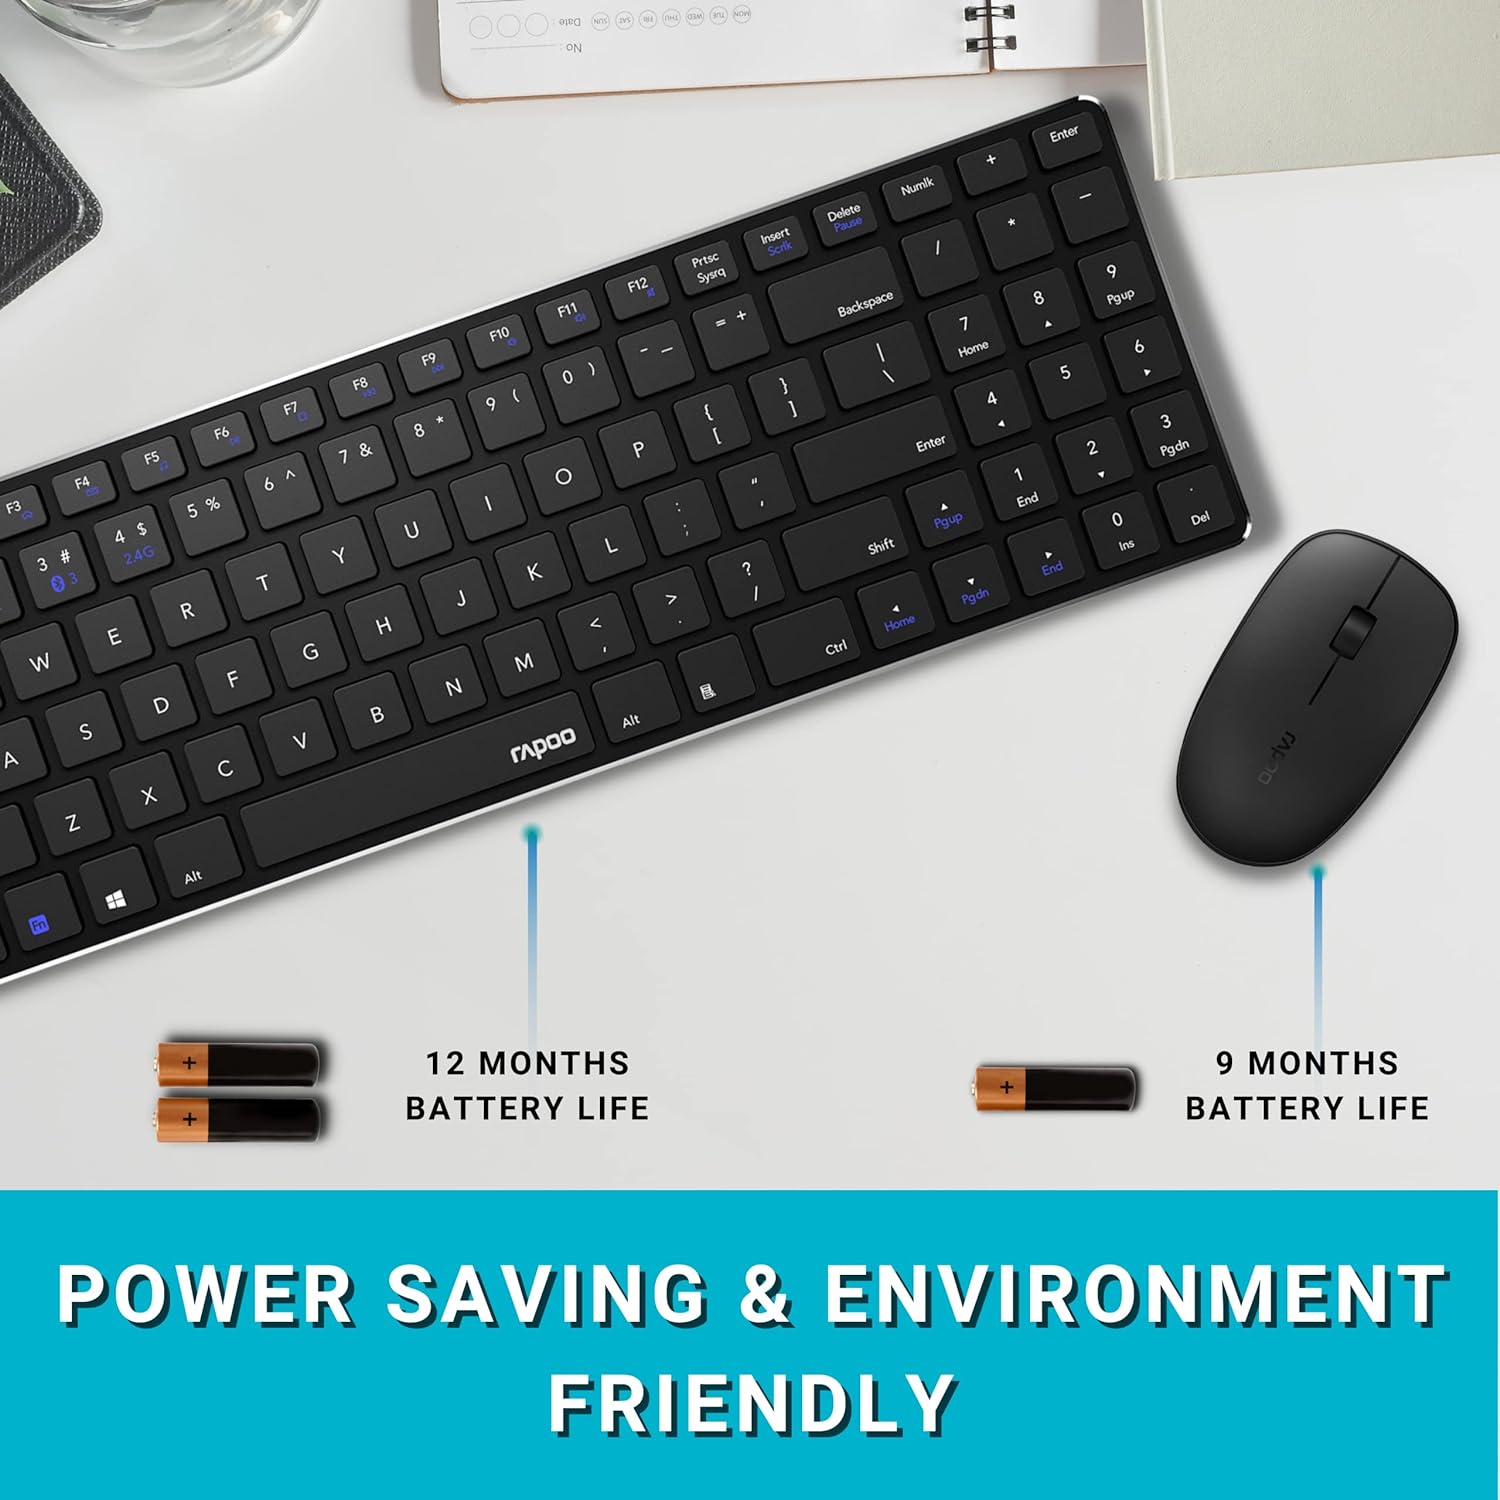 Rapoo 9300M Multi-Mode Wireless Keyboard and Mouse